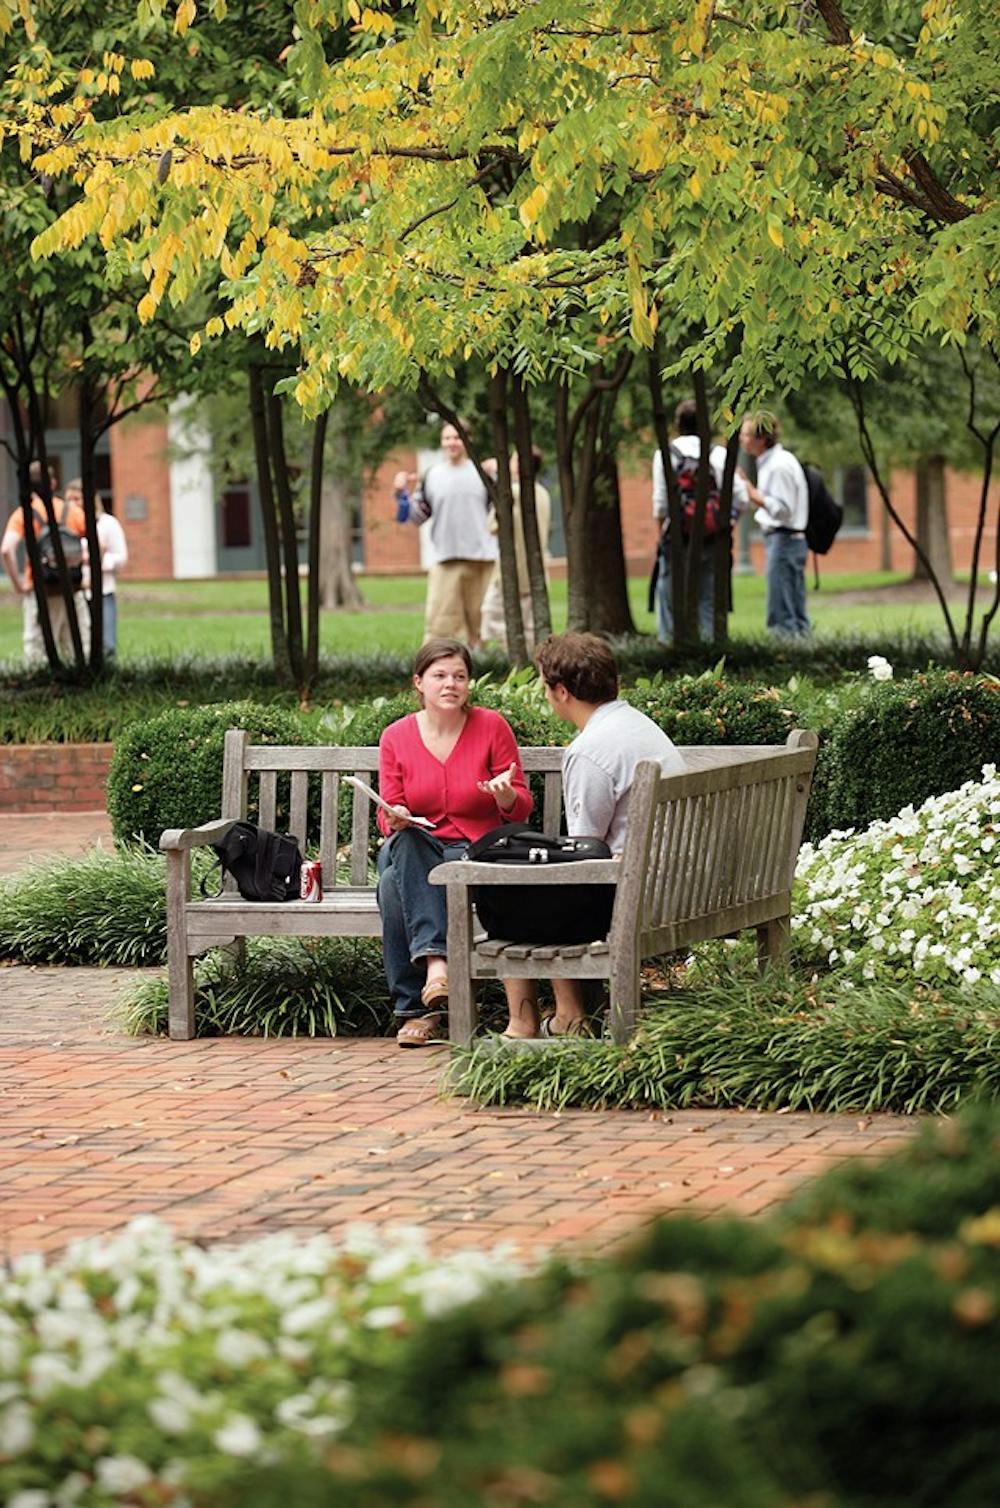 Increasing outdoor study spaces would benefit students and the environment.